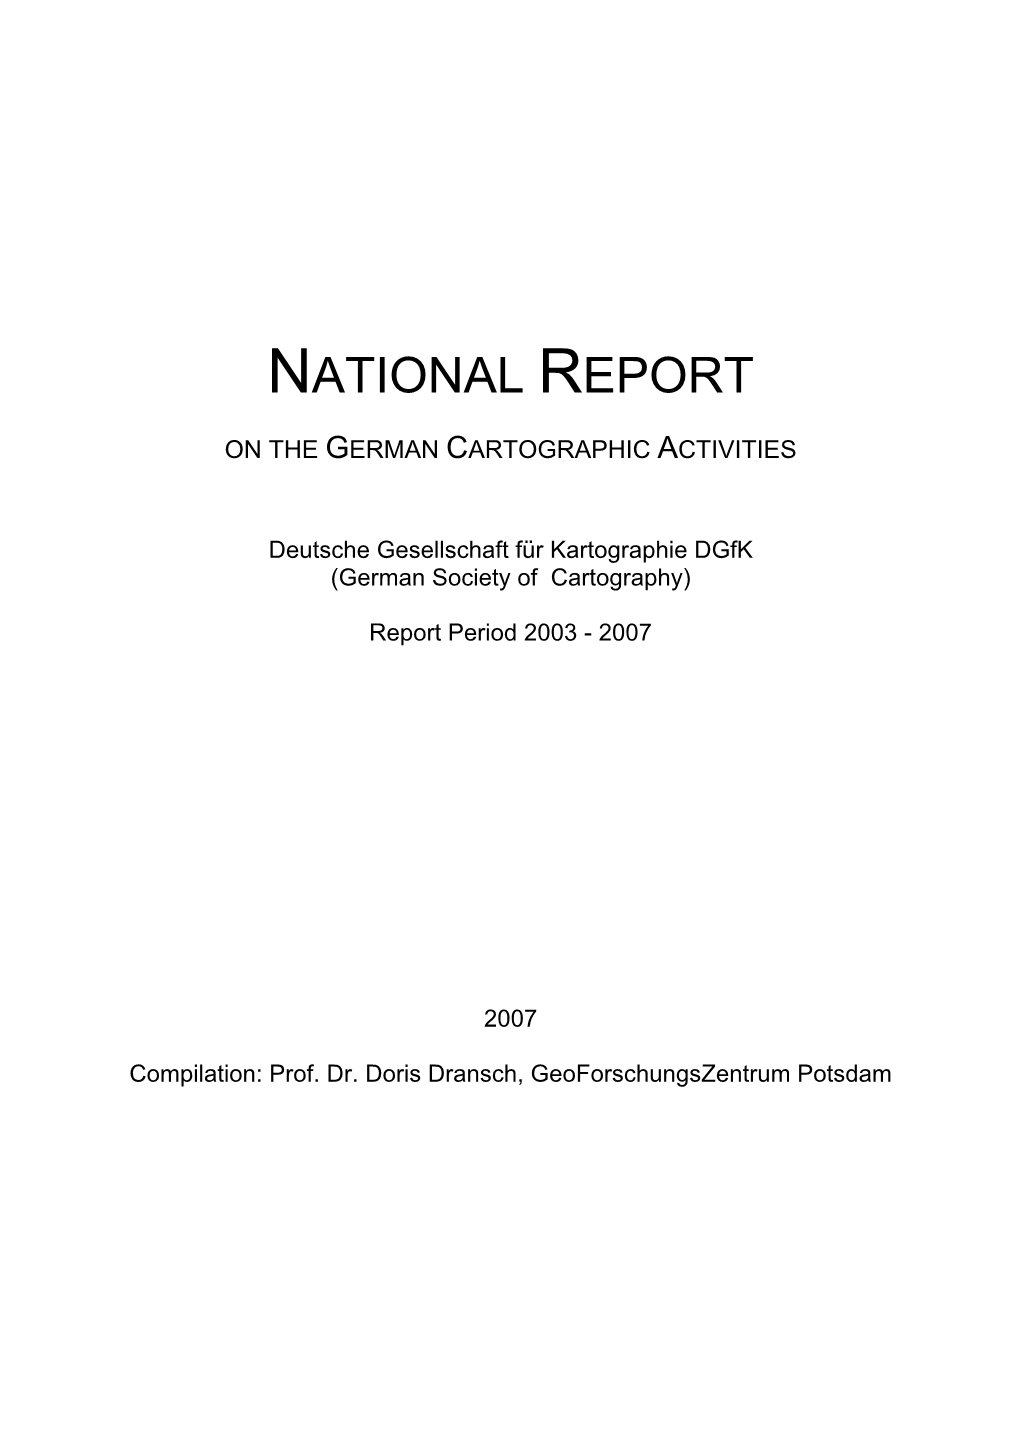 National Report